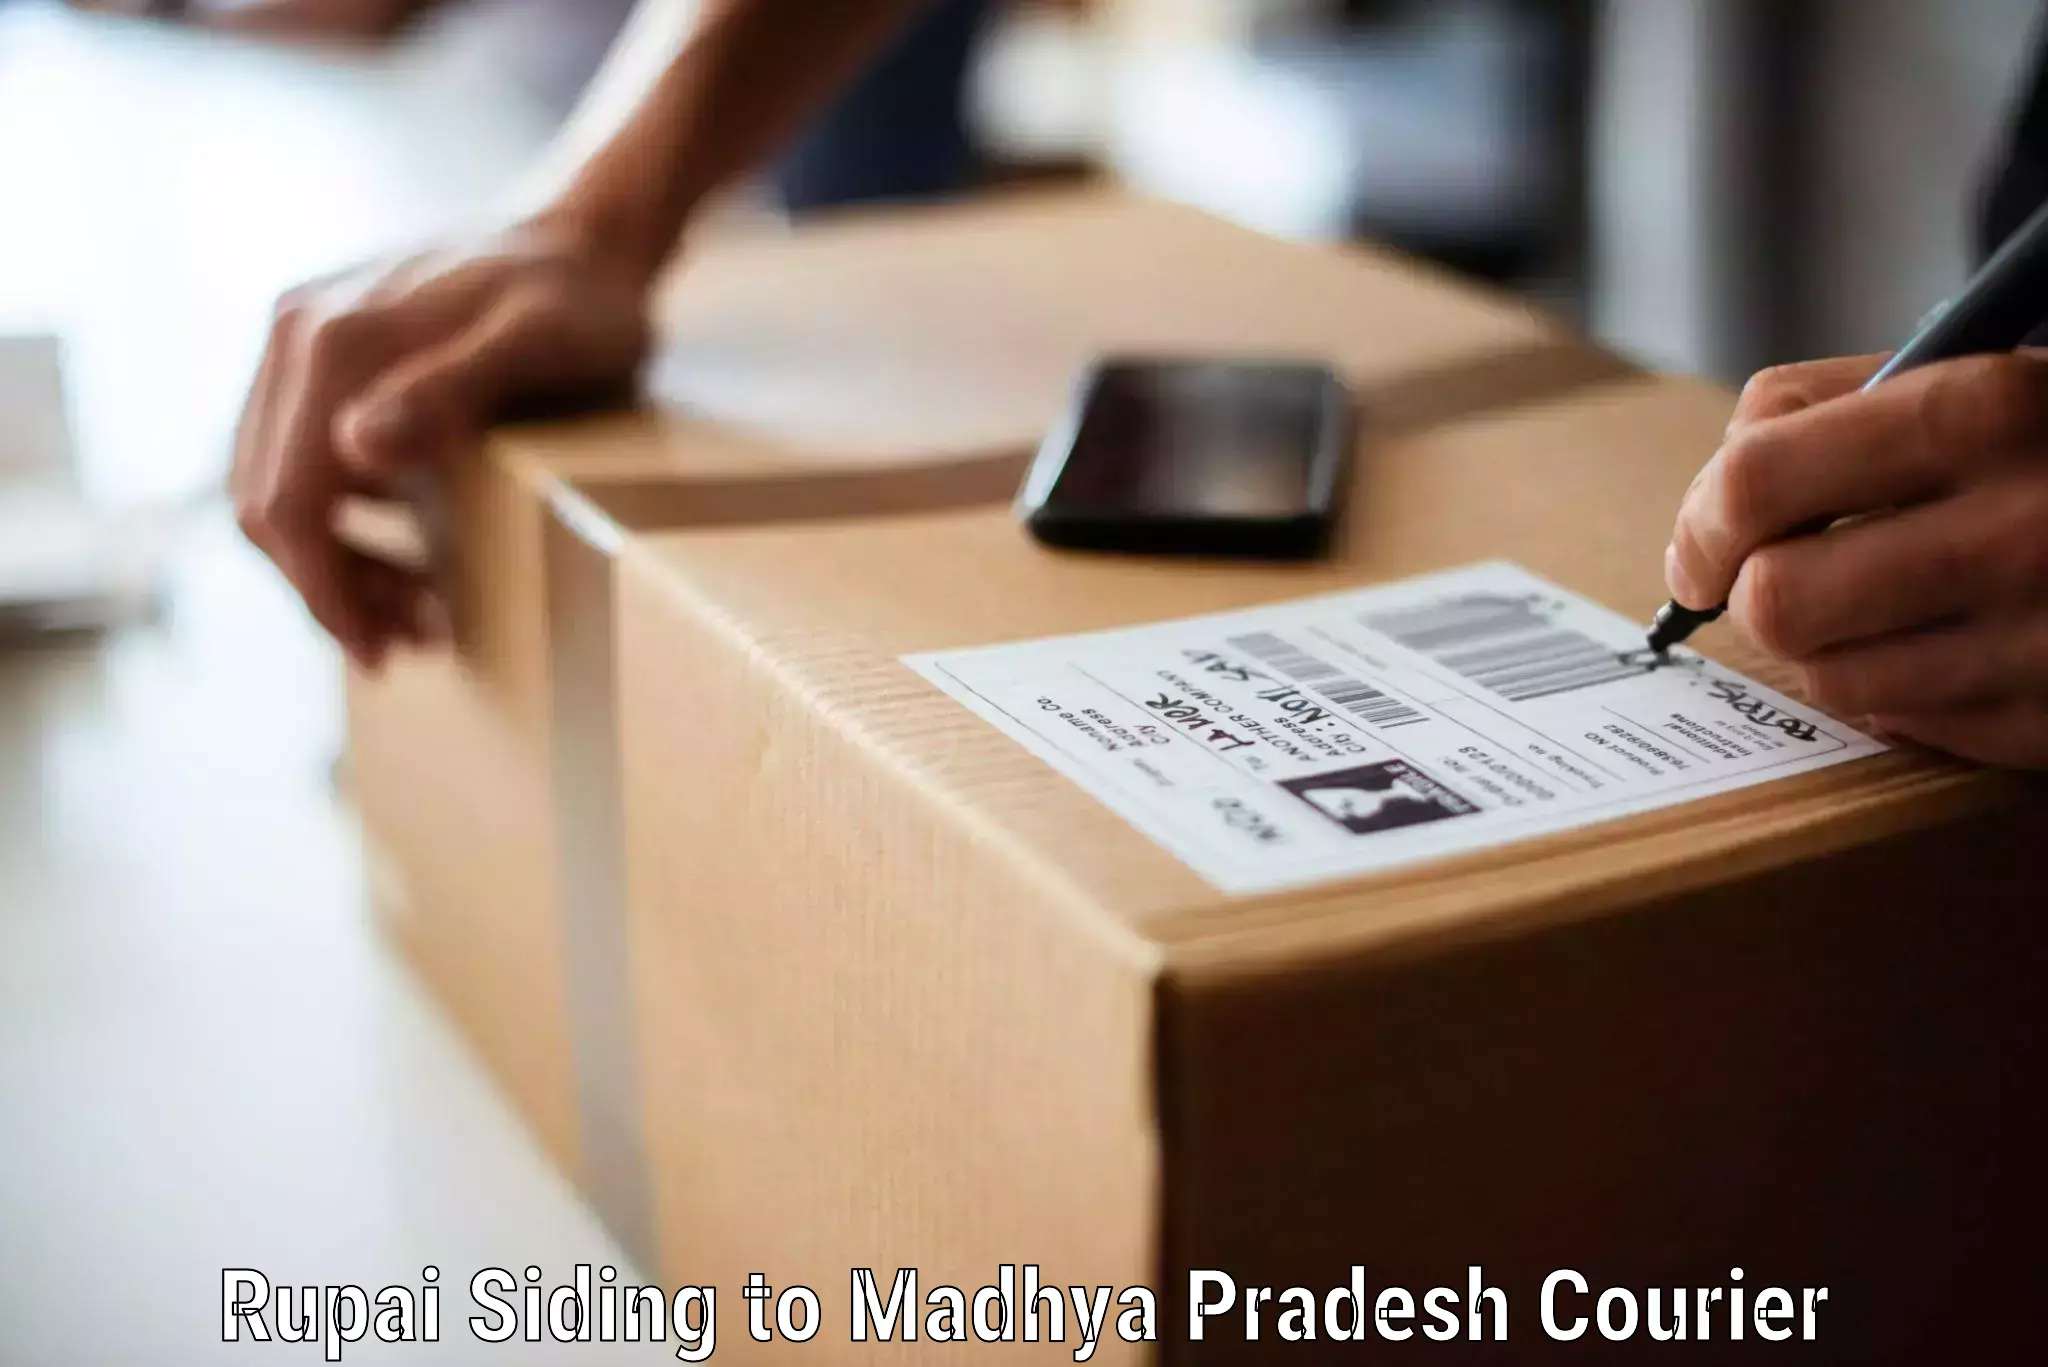 Budget-friendly movers Rupai Siding to Gwalior